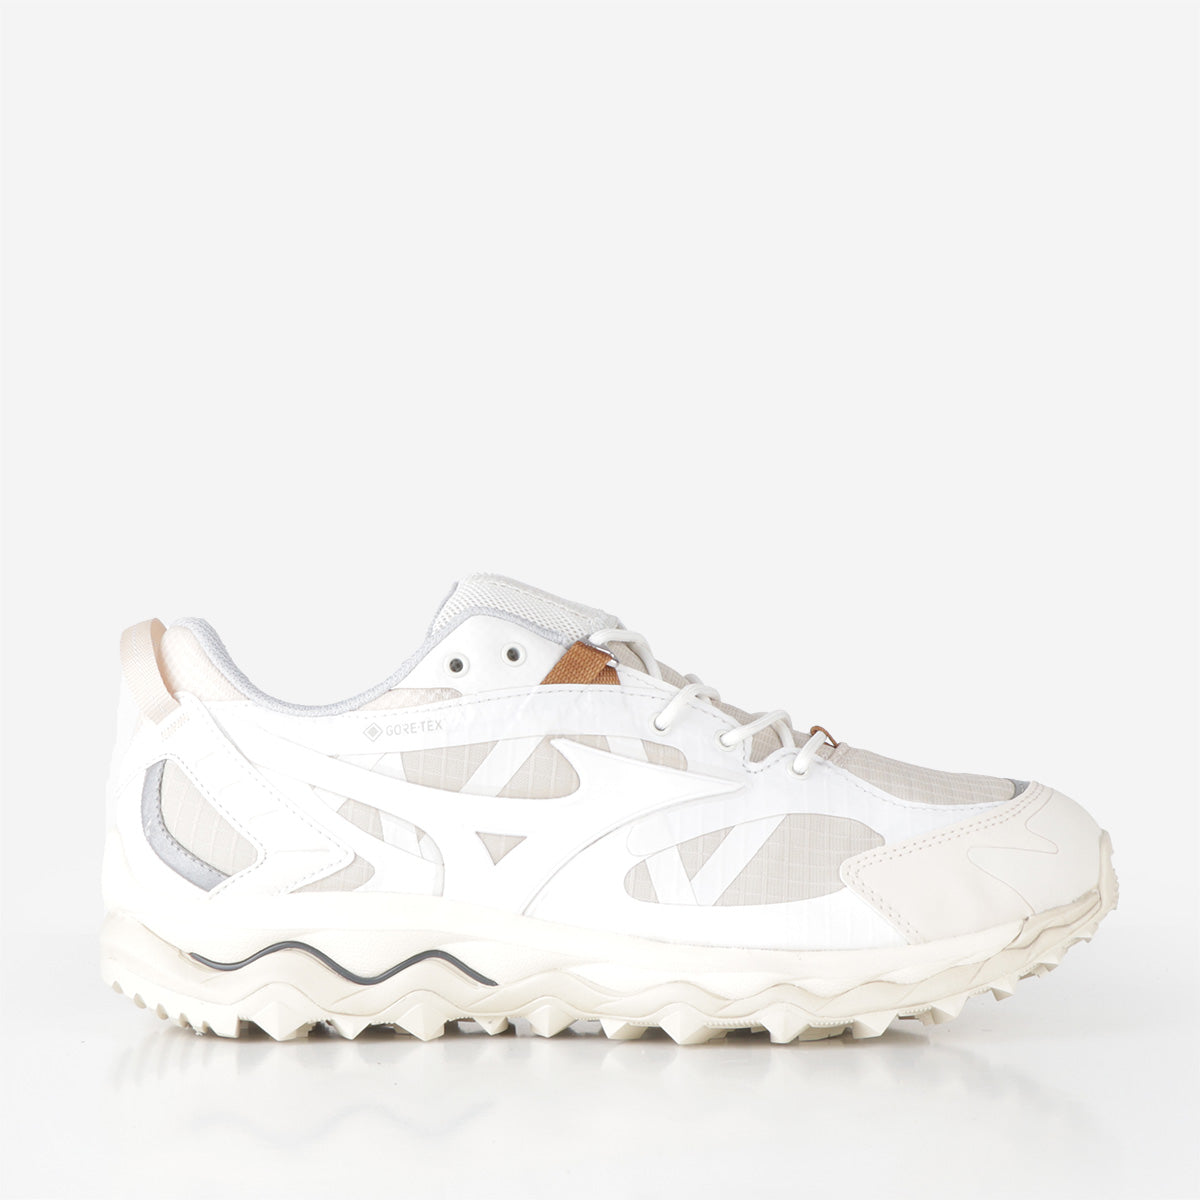 Mizuno Wave Mujin TL GTX Shoes - Summer Sand/White/Mother of Pearl 